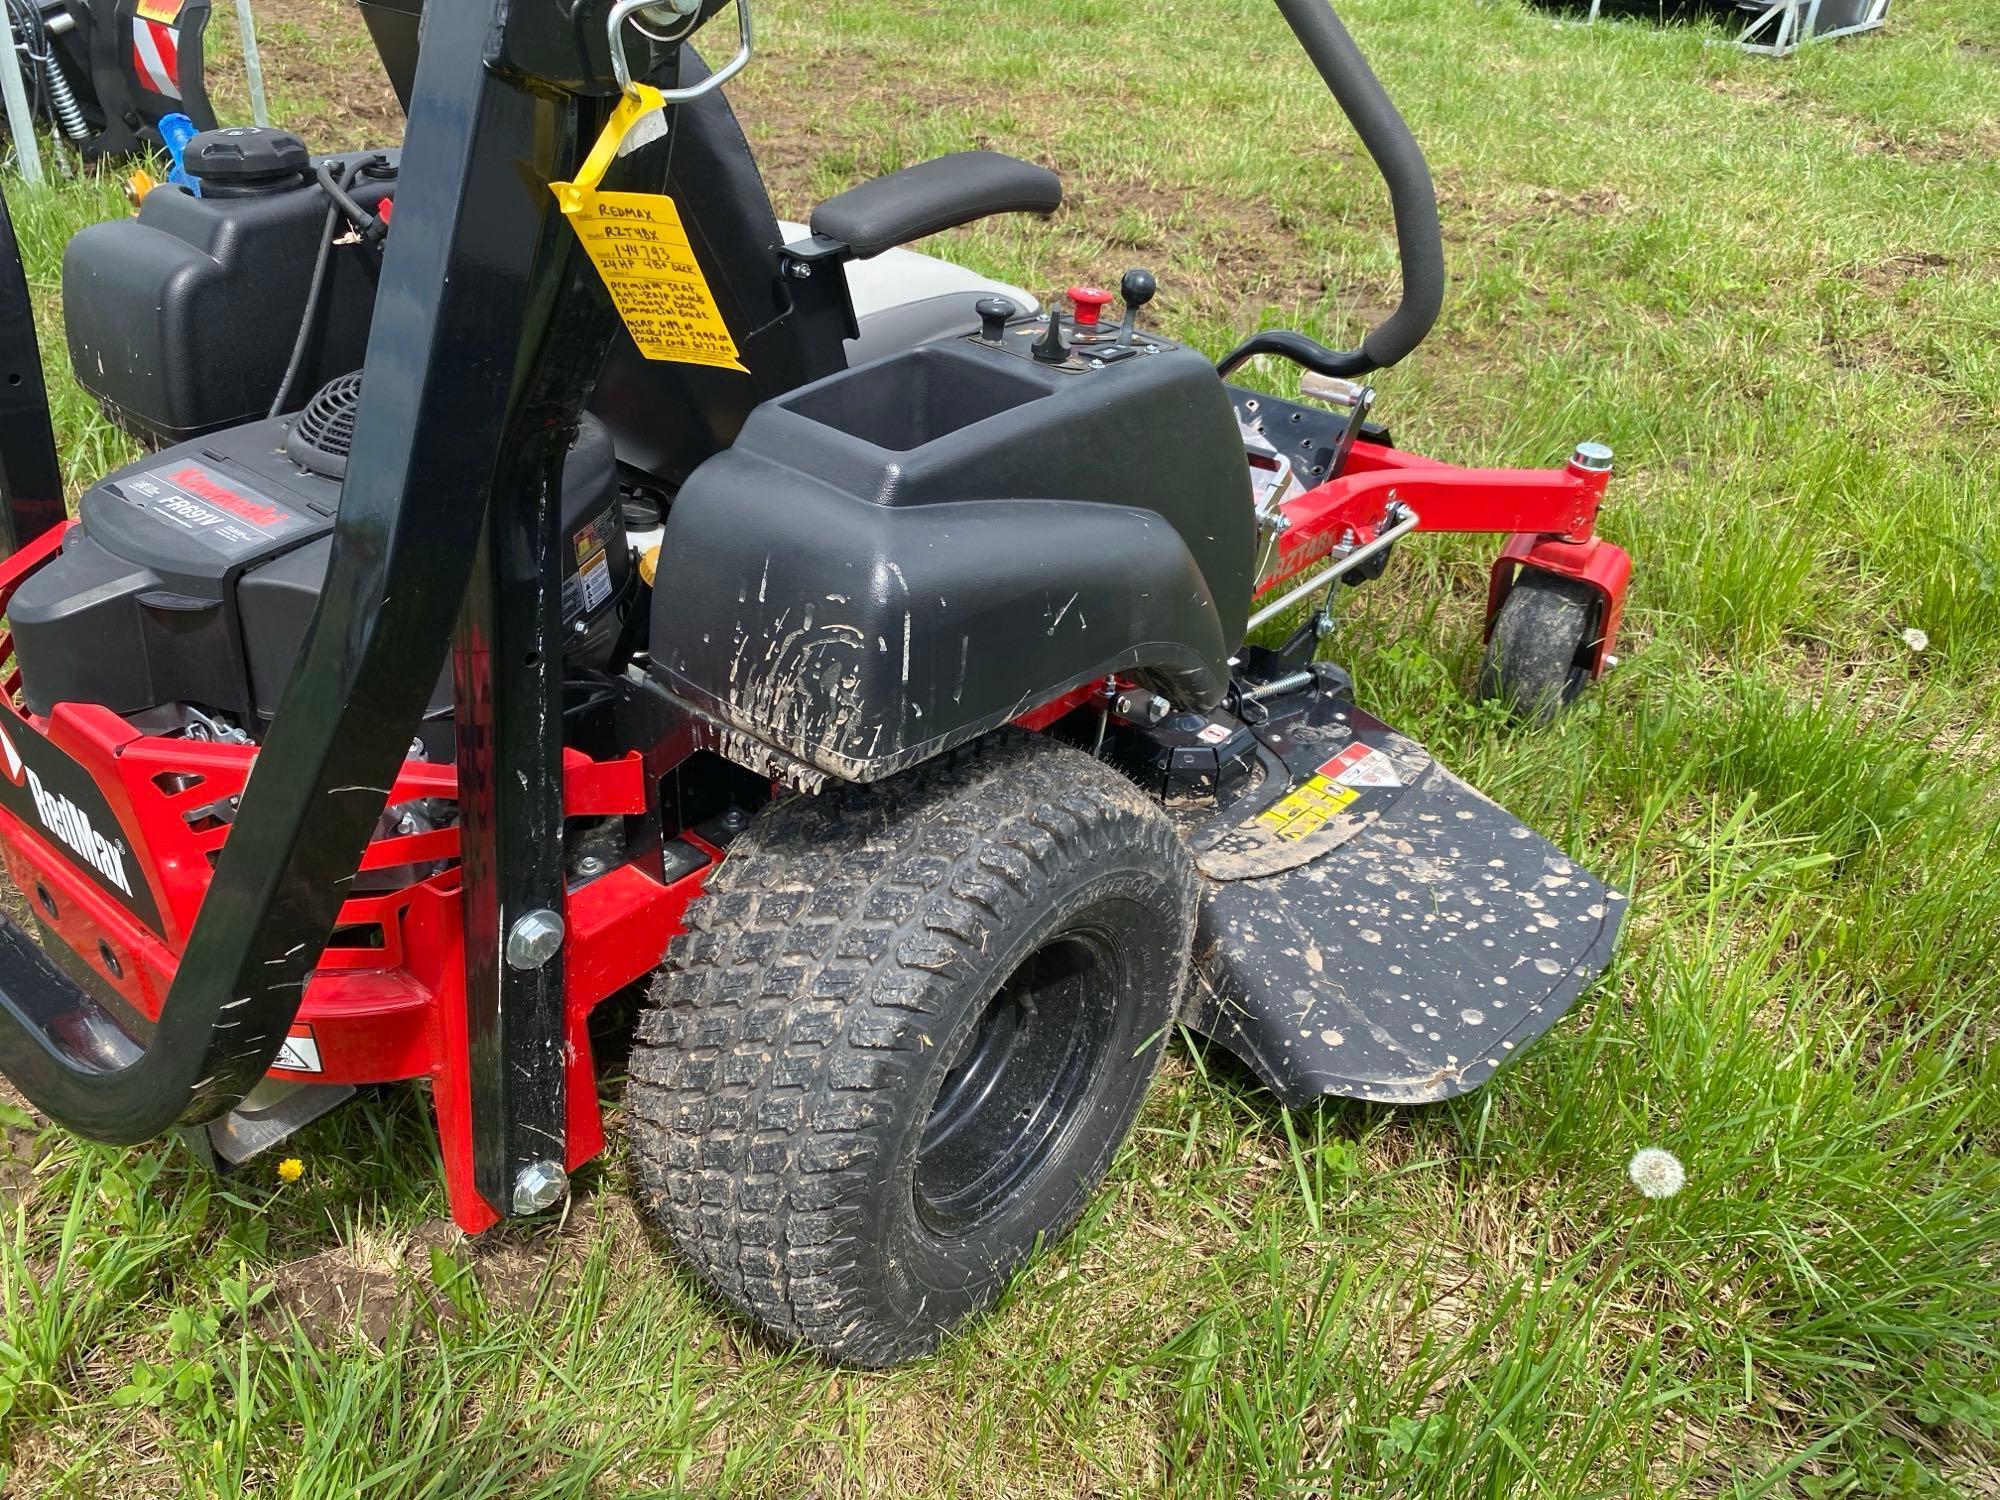 UNUSED REDMAX RTZ48X COMMERCIAL MOWER SN-001480 powered by Kawasaki gas engine, equipped with 48in.